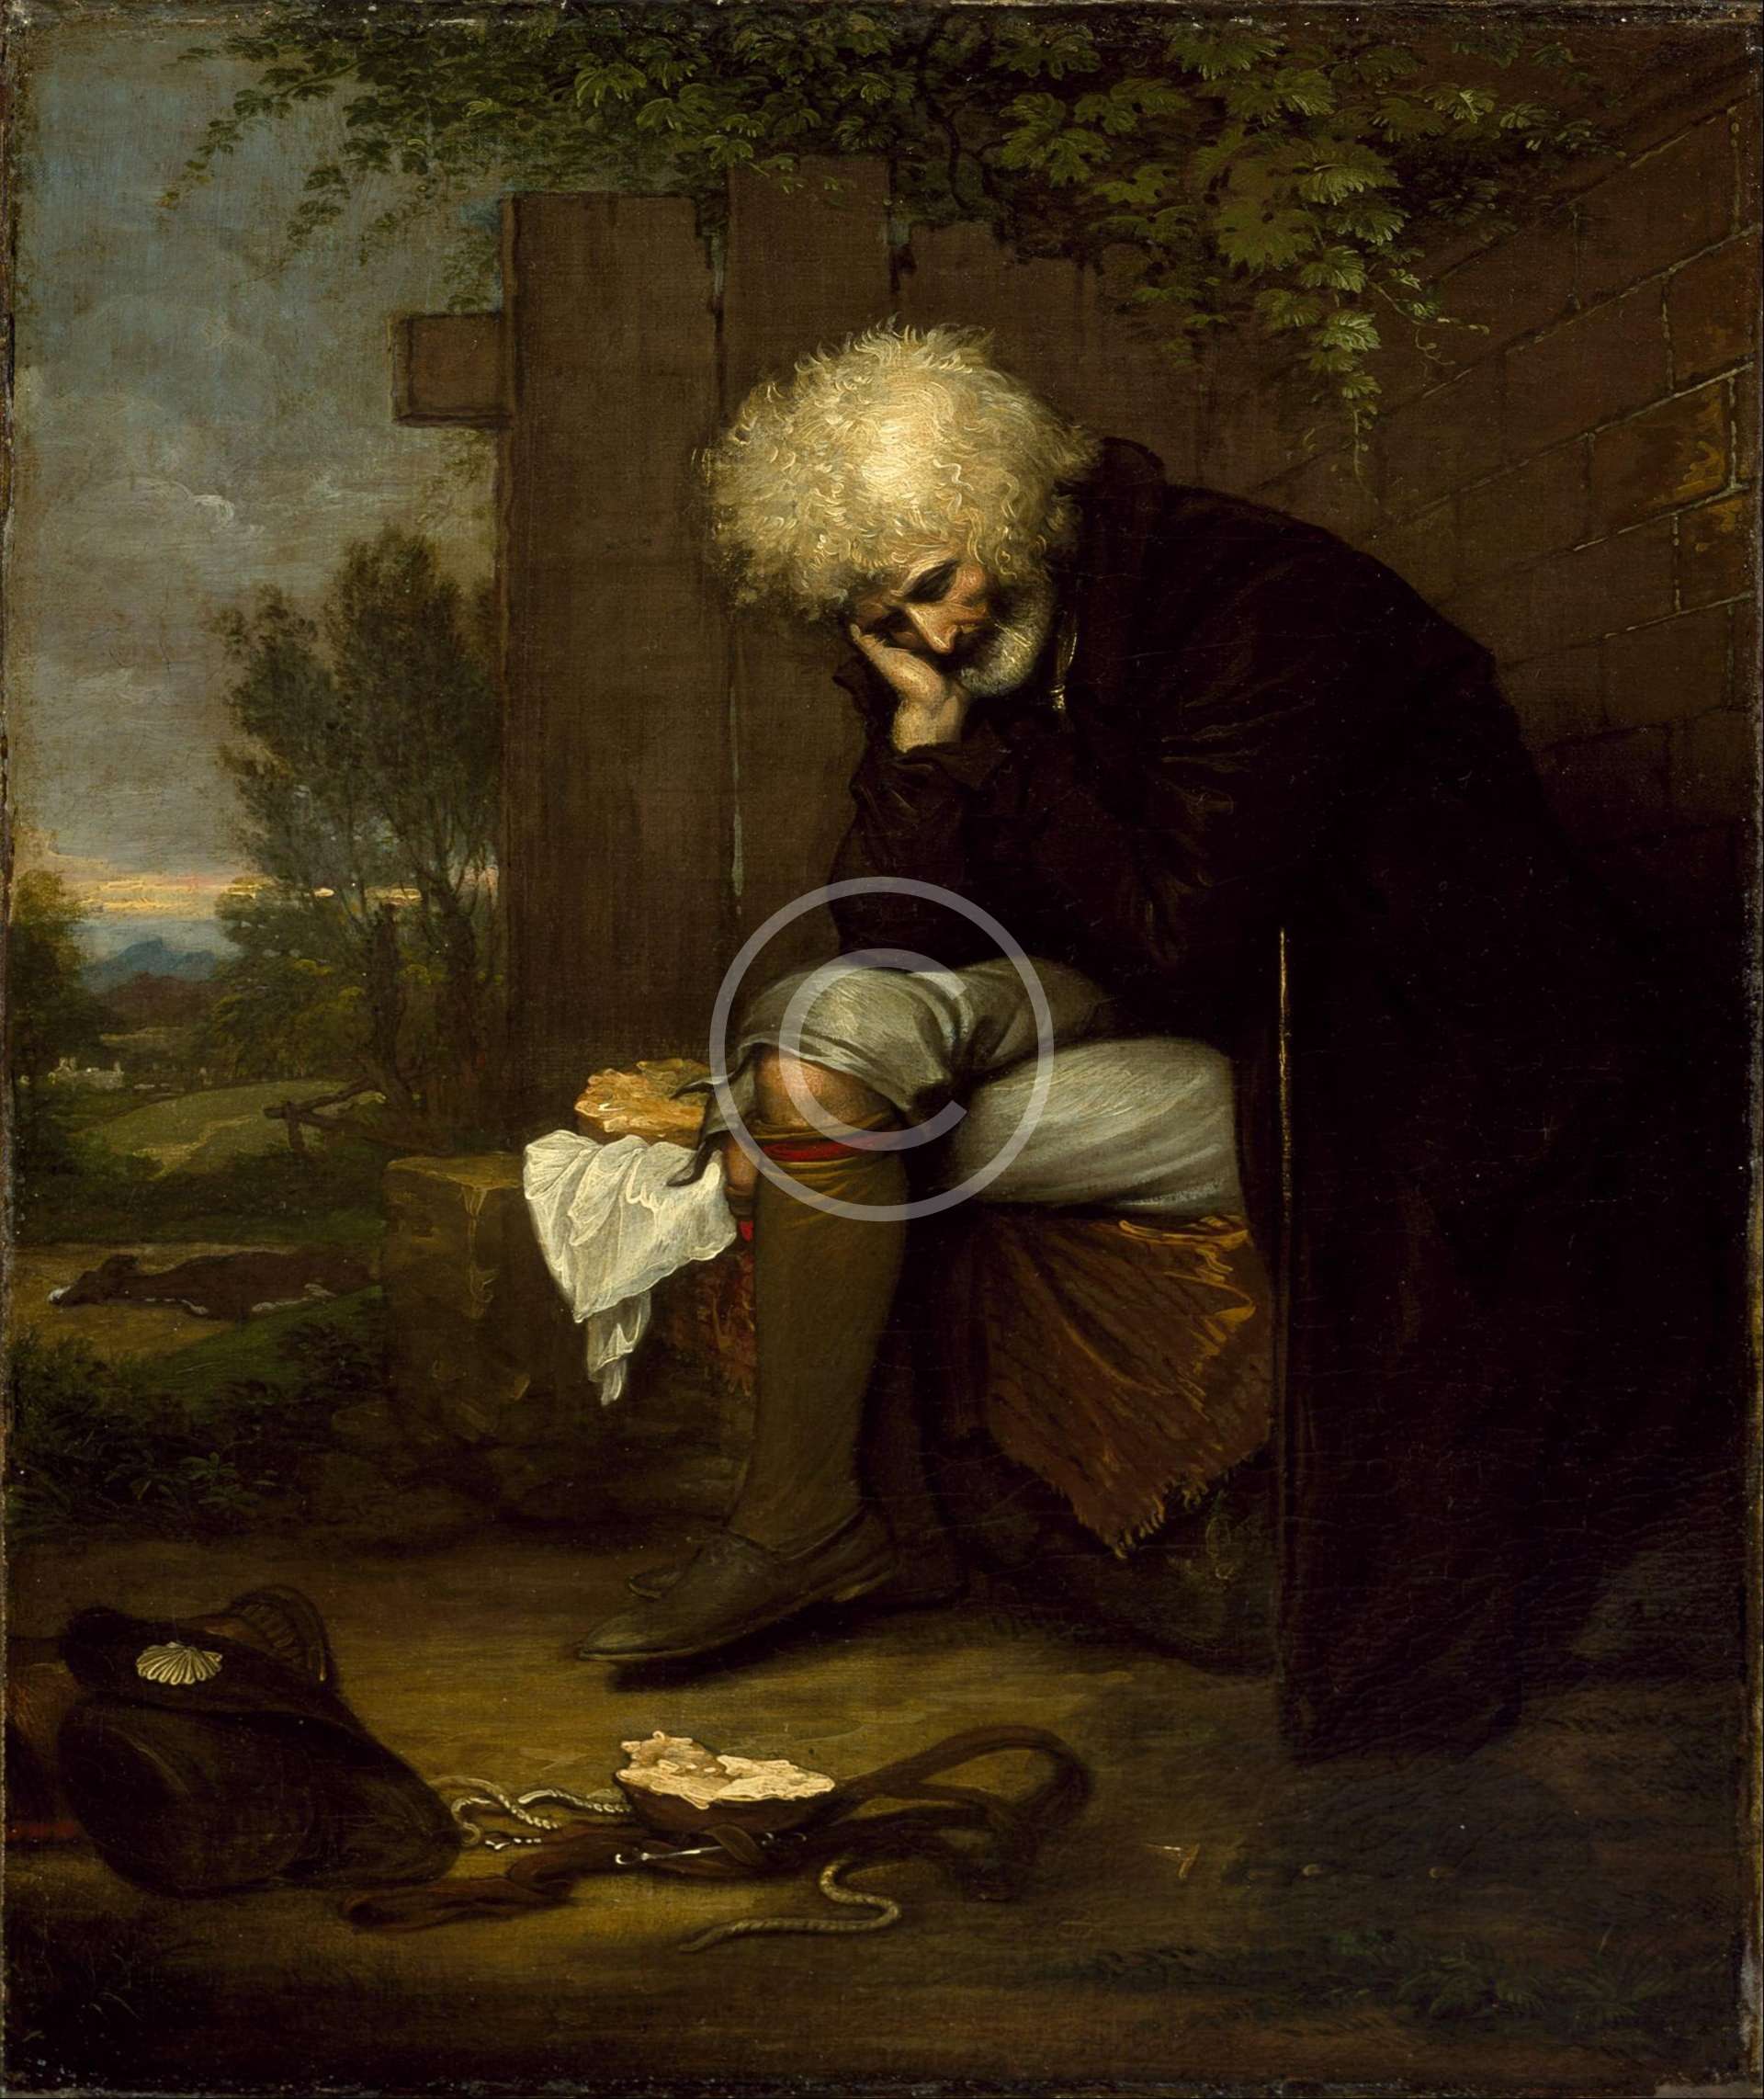 The Pilgrim Mourning His Dead Ass